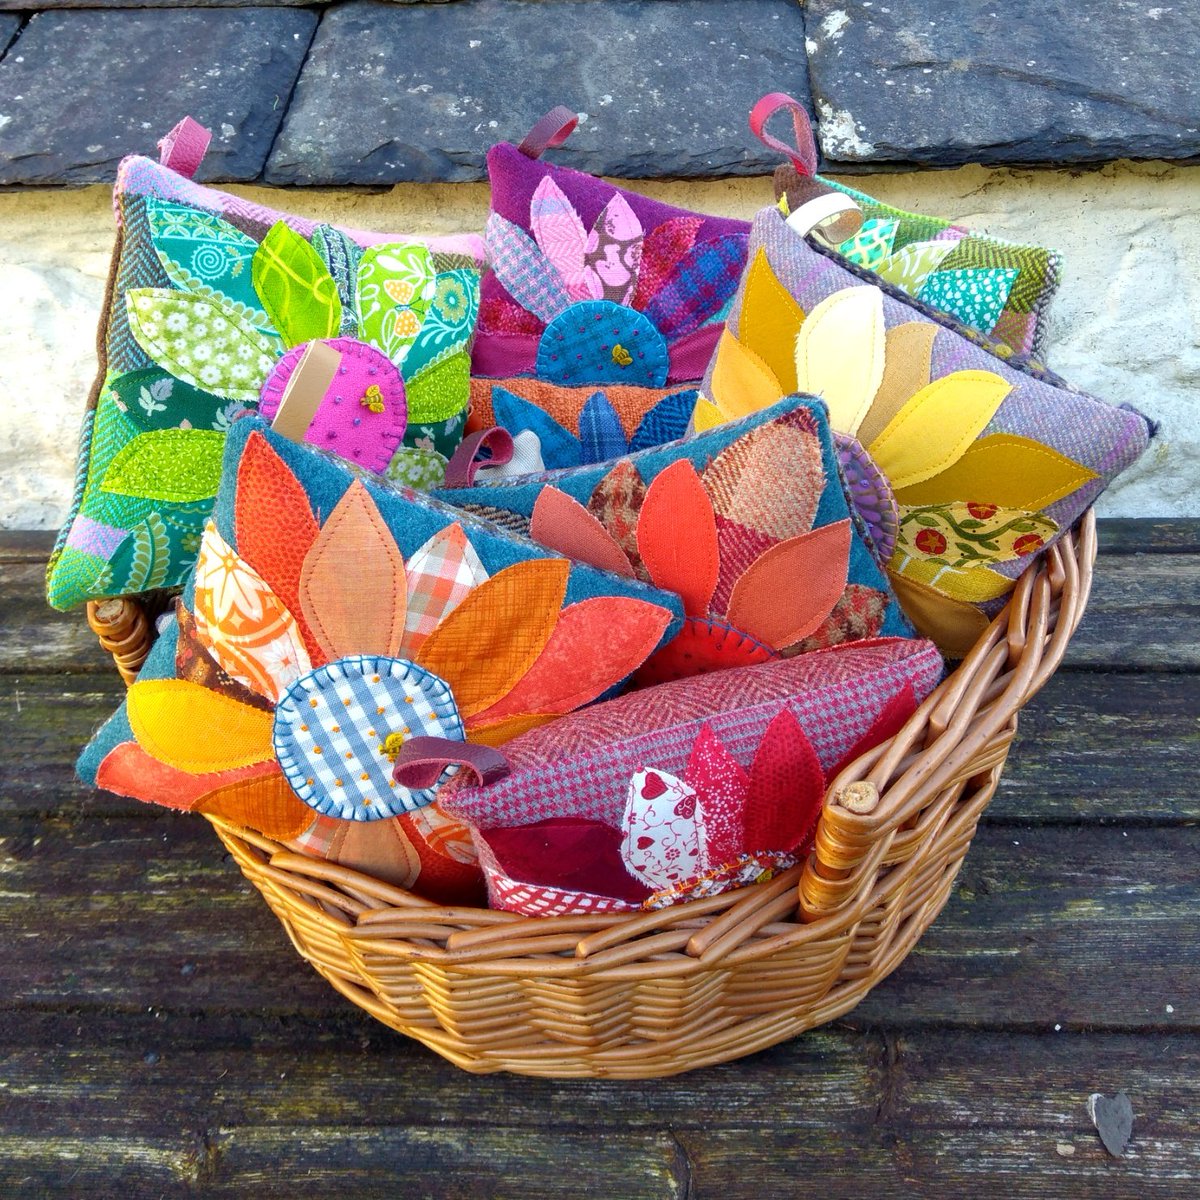 A basket full of flower pincushions 🌻 It's a time for bright colours to make you smile 🧡
#HandmadeHour #handmade #Flowers #recycling #textiles #giftideas #shoplocal #shopscotland